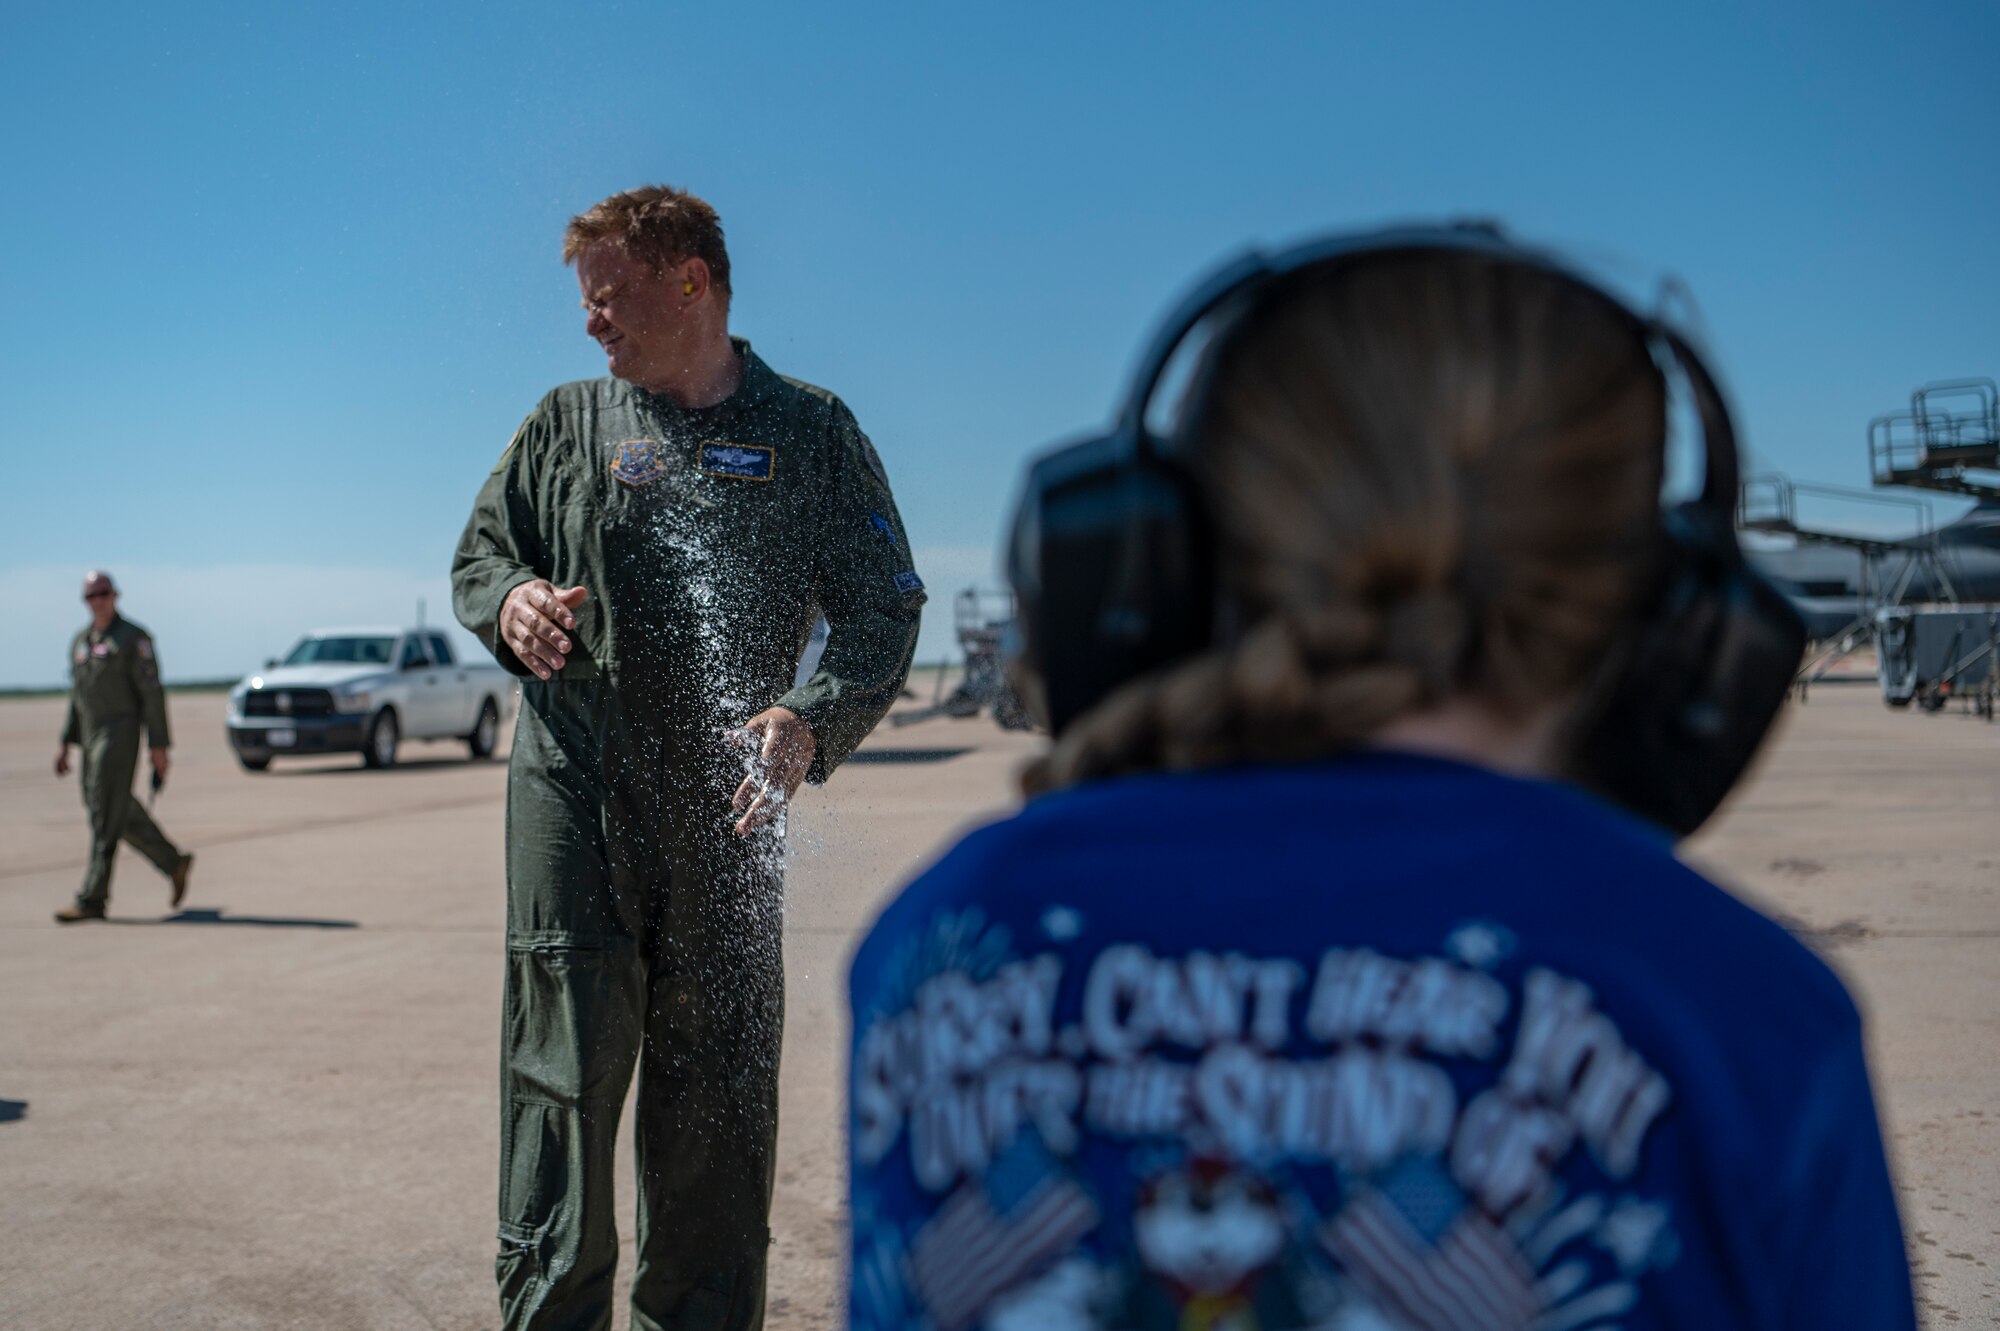 U.S. Air Force Col. Kevin Kippie, 7th Bomb Wing vice commander, gets sprayed by his daughter Jennifer Kippie at Dyess Air Force Base, Texas, June 29, 2023. Kippie served at Dyess from June 11, 2021, to June 16, 2023. While at Dyess, Kippie was committed to excellence as he fostered financial innovation and proposals for the installation, created a Wing Welcome Center for new Airmen and worked in integrated teams to action the wing’s fiscal efforts. (U.S. Air Force photo by Senior Airman Ryan Hayman)